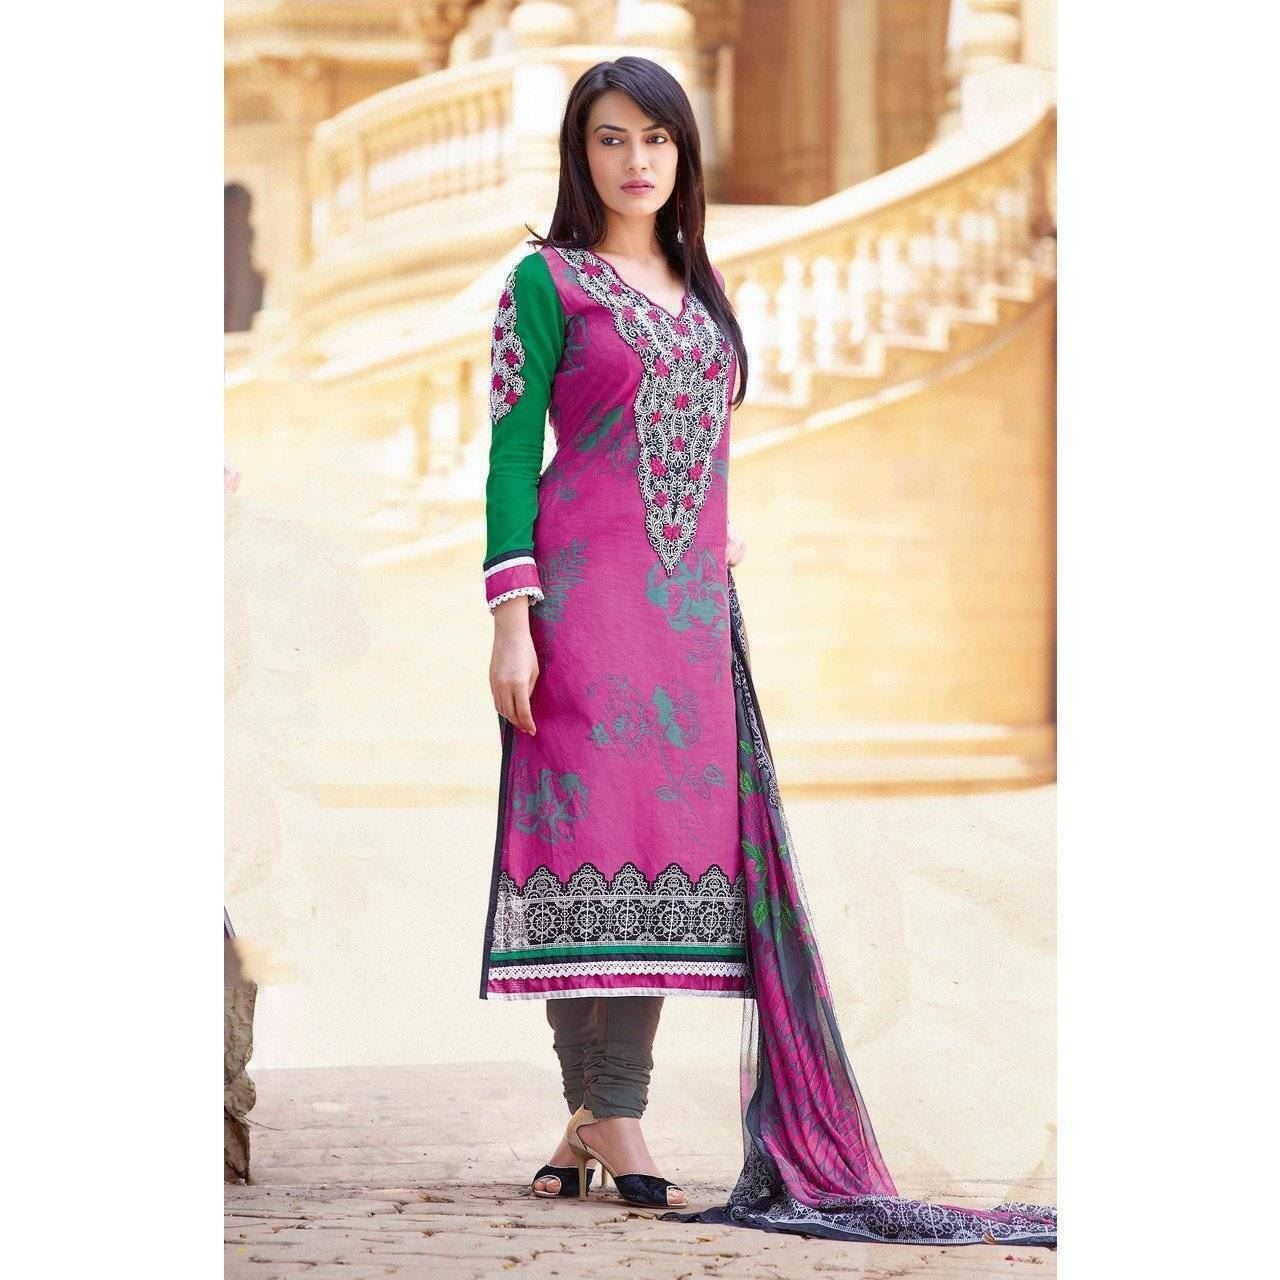 Dashing Deep Pink Color Printed Unstitched Casualwear Salwar Suit Cotton Shirt F